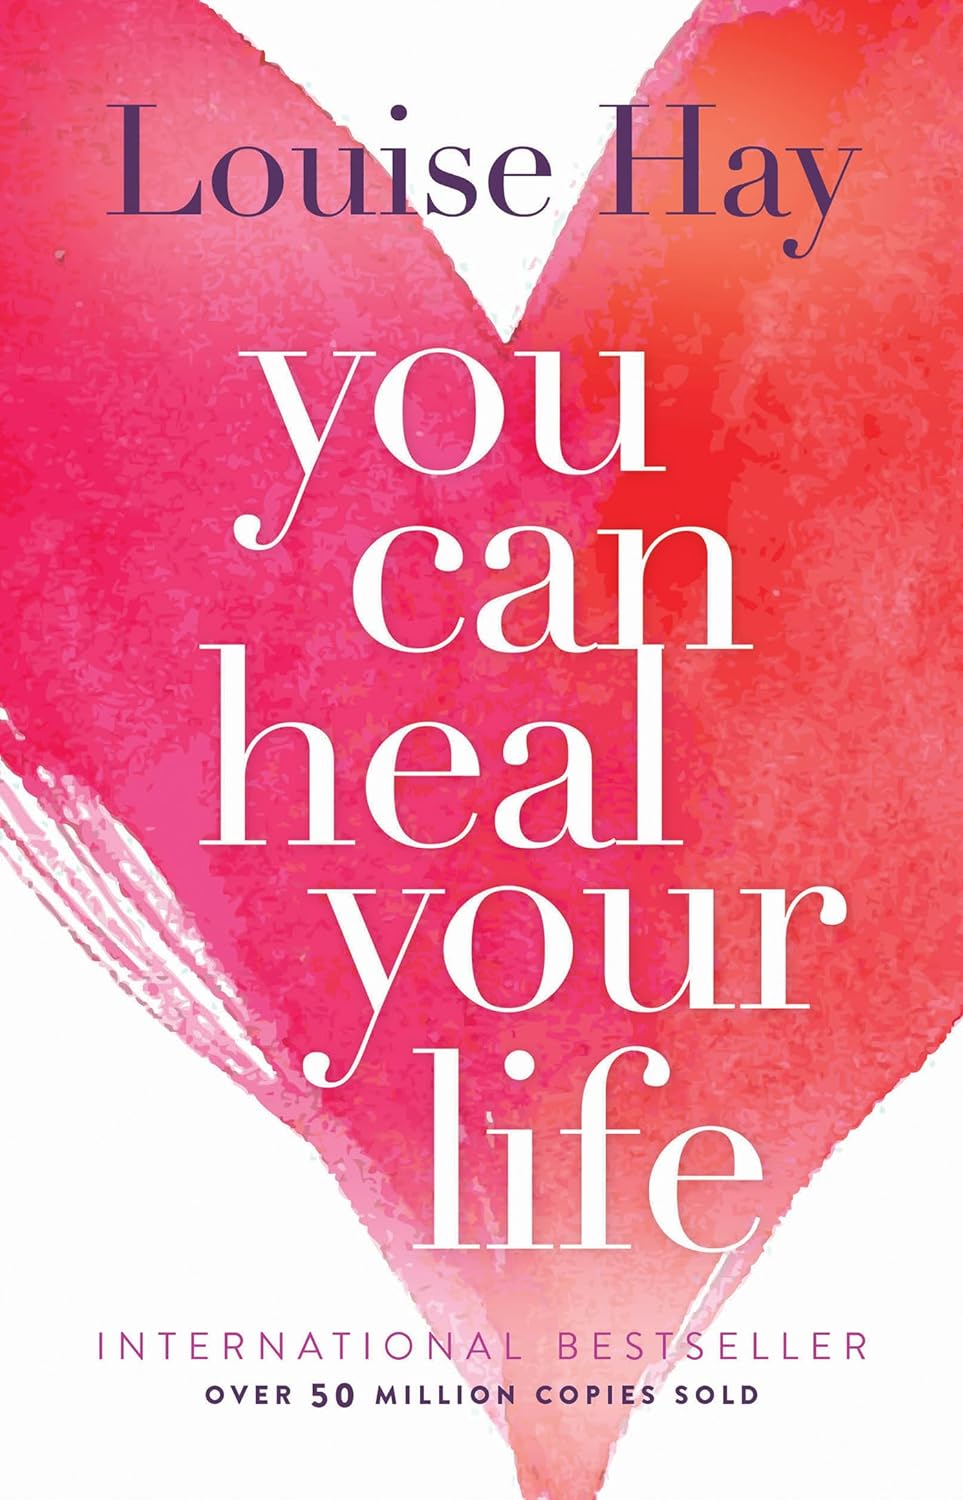 You Can Heal Your Life has transformed the lives of millions of people. This is a book that people credit with profoundly altering their awareness of the impact that the mind has on health and wellbeing. In this inspirational book by the late world-renowned bestselling author and self-help pioneer Louise Hay, you’ll find profound insight into the relationship between the mind and the body.